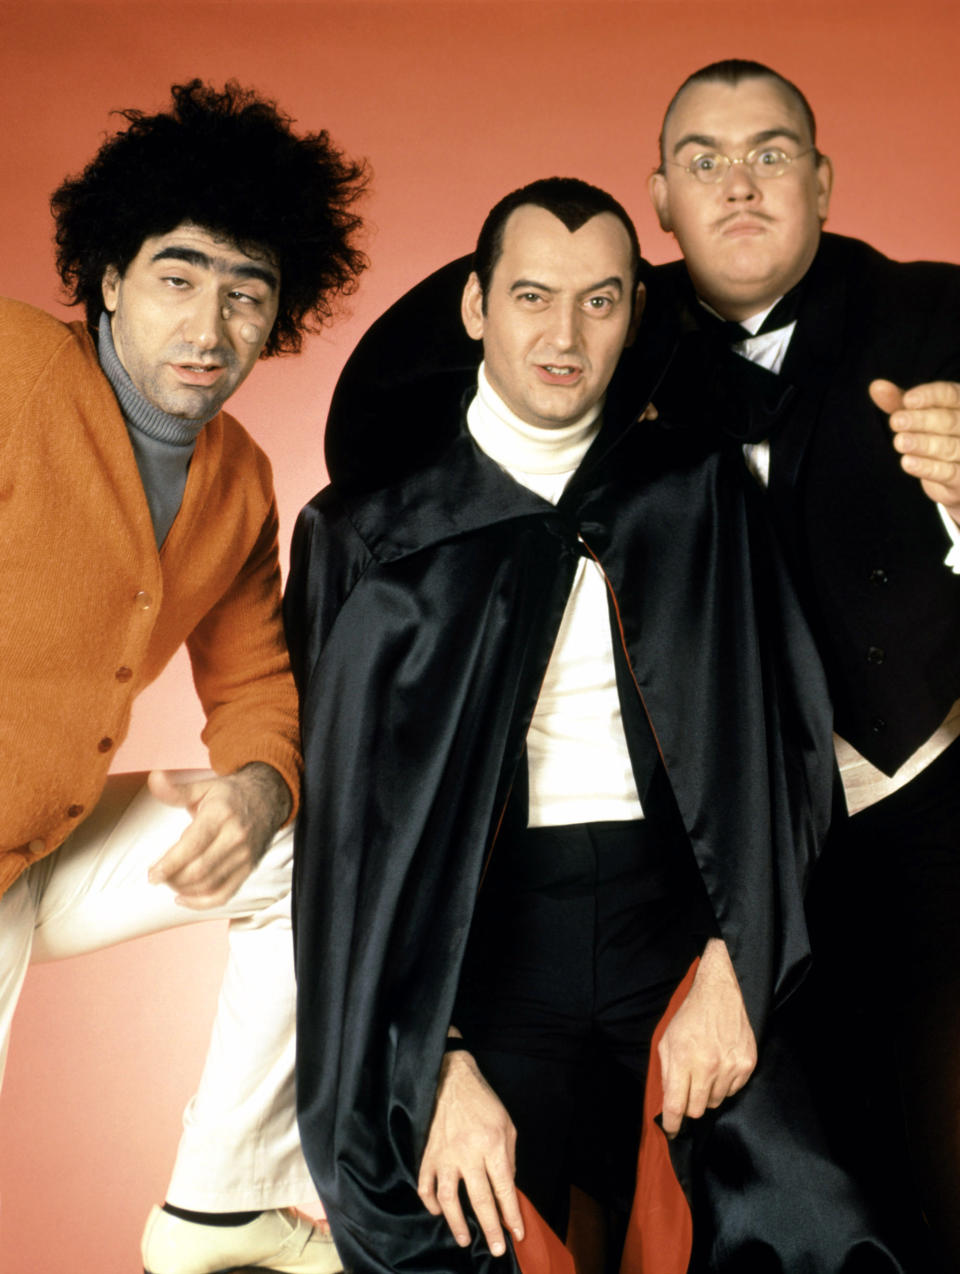 (L-R) Eugene Levy, Joe Flaherty and John Candy from ‘SCTV’